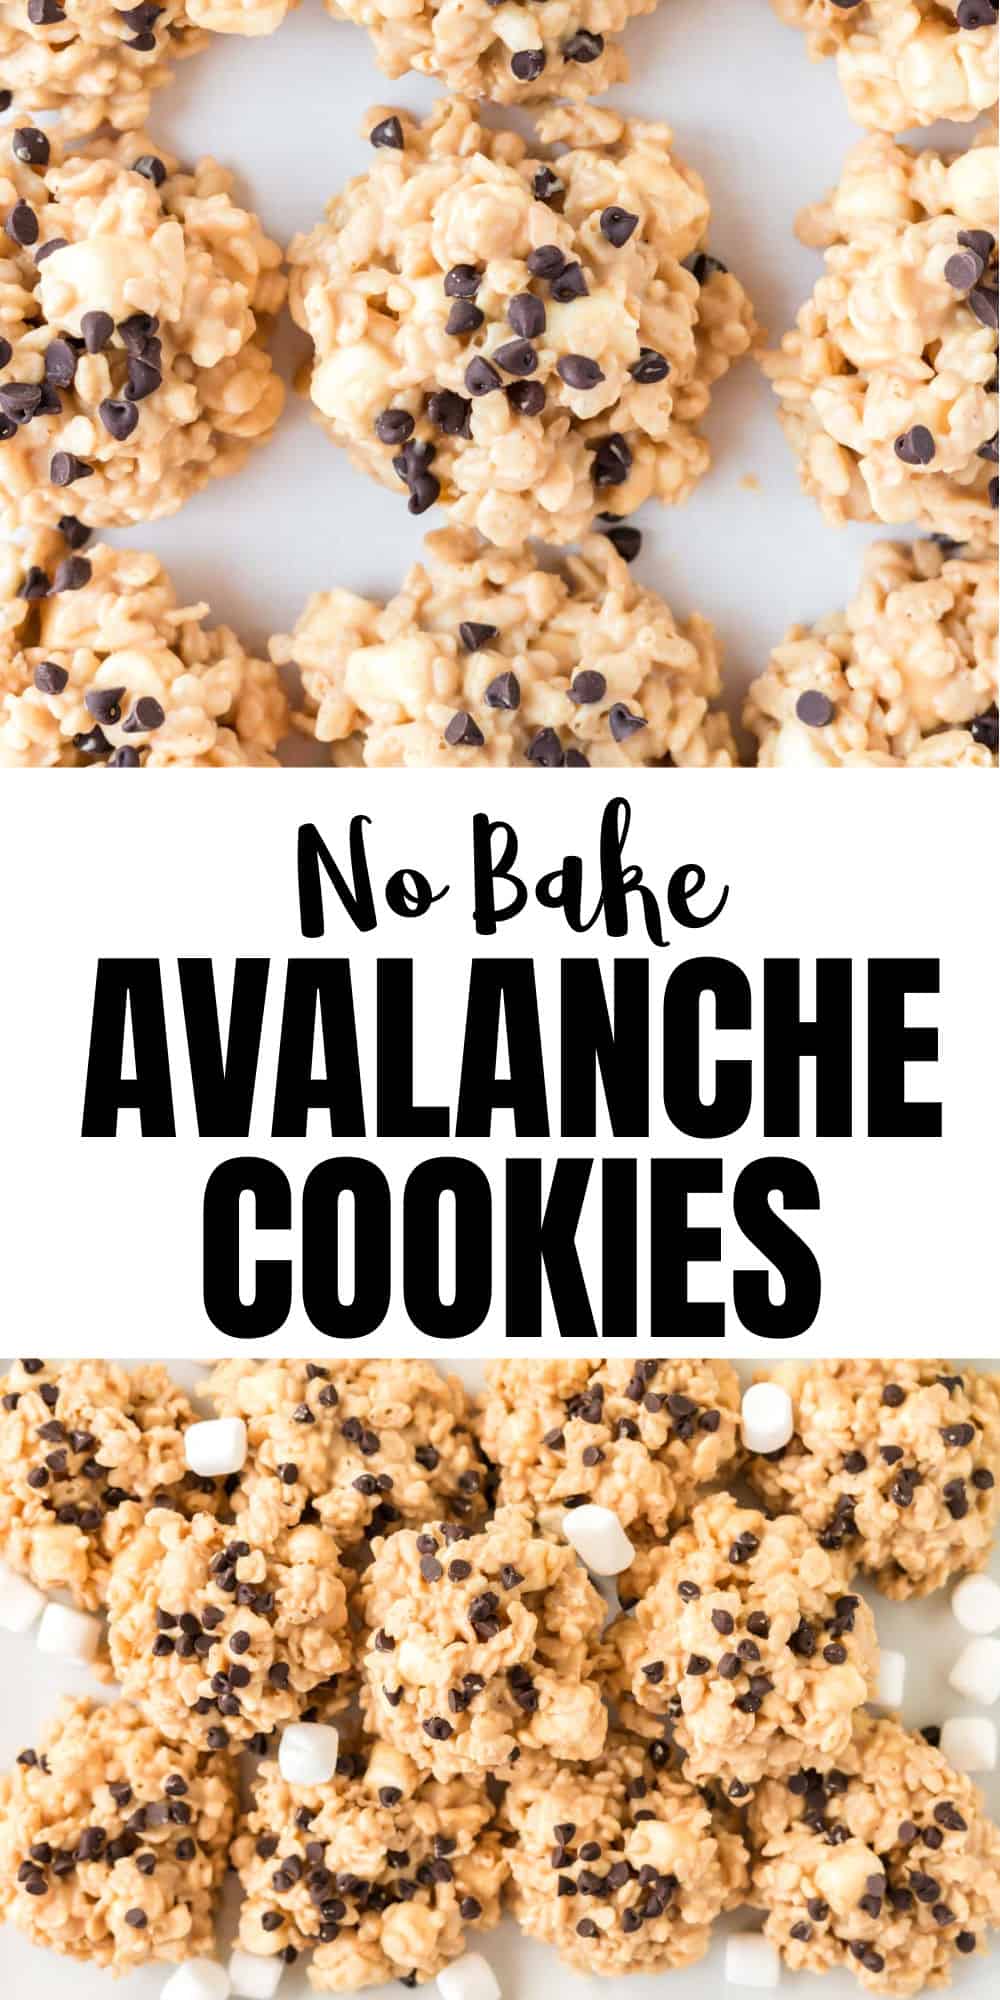 image with text "no bake avalanche cookies"